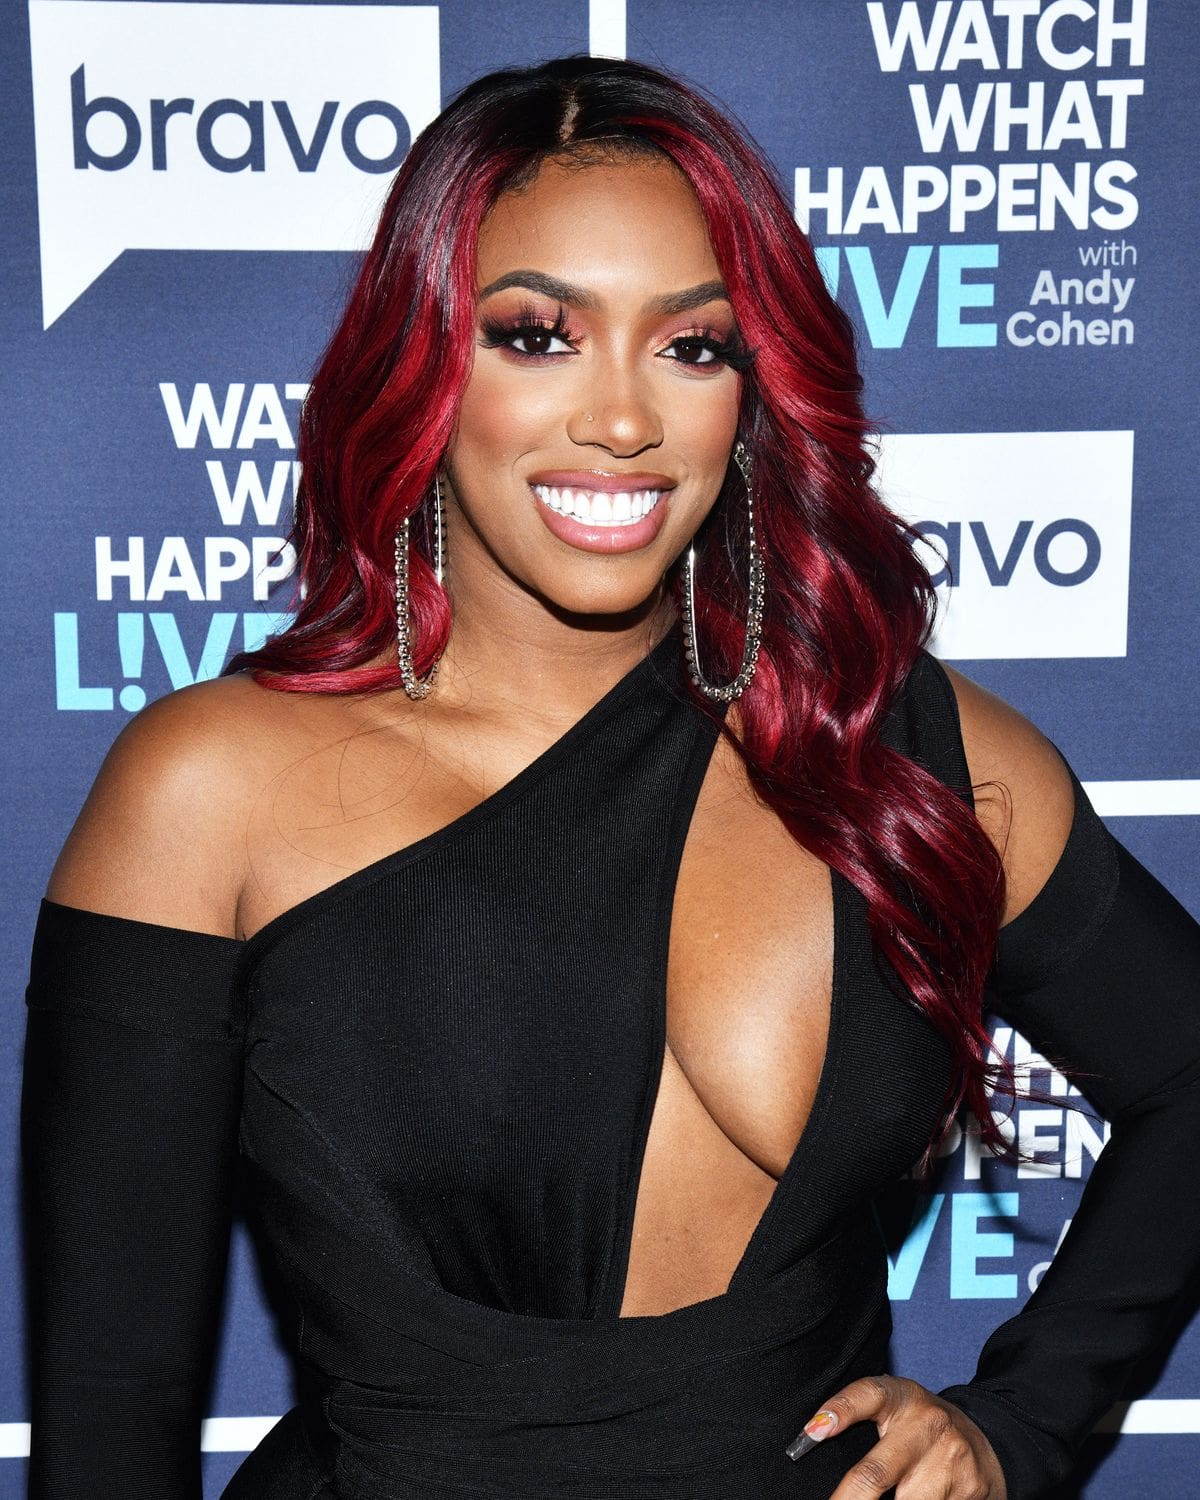 Porsha Williams Shares One Of Her Juicy Vegan Meals And Fans Love It - See The Photo